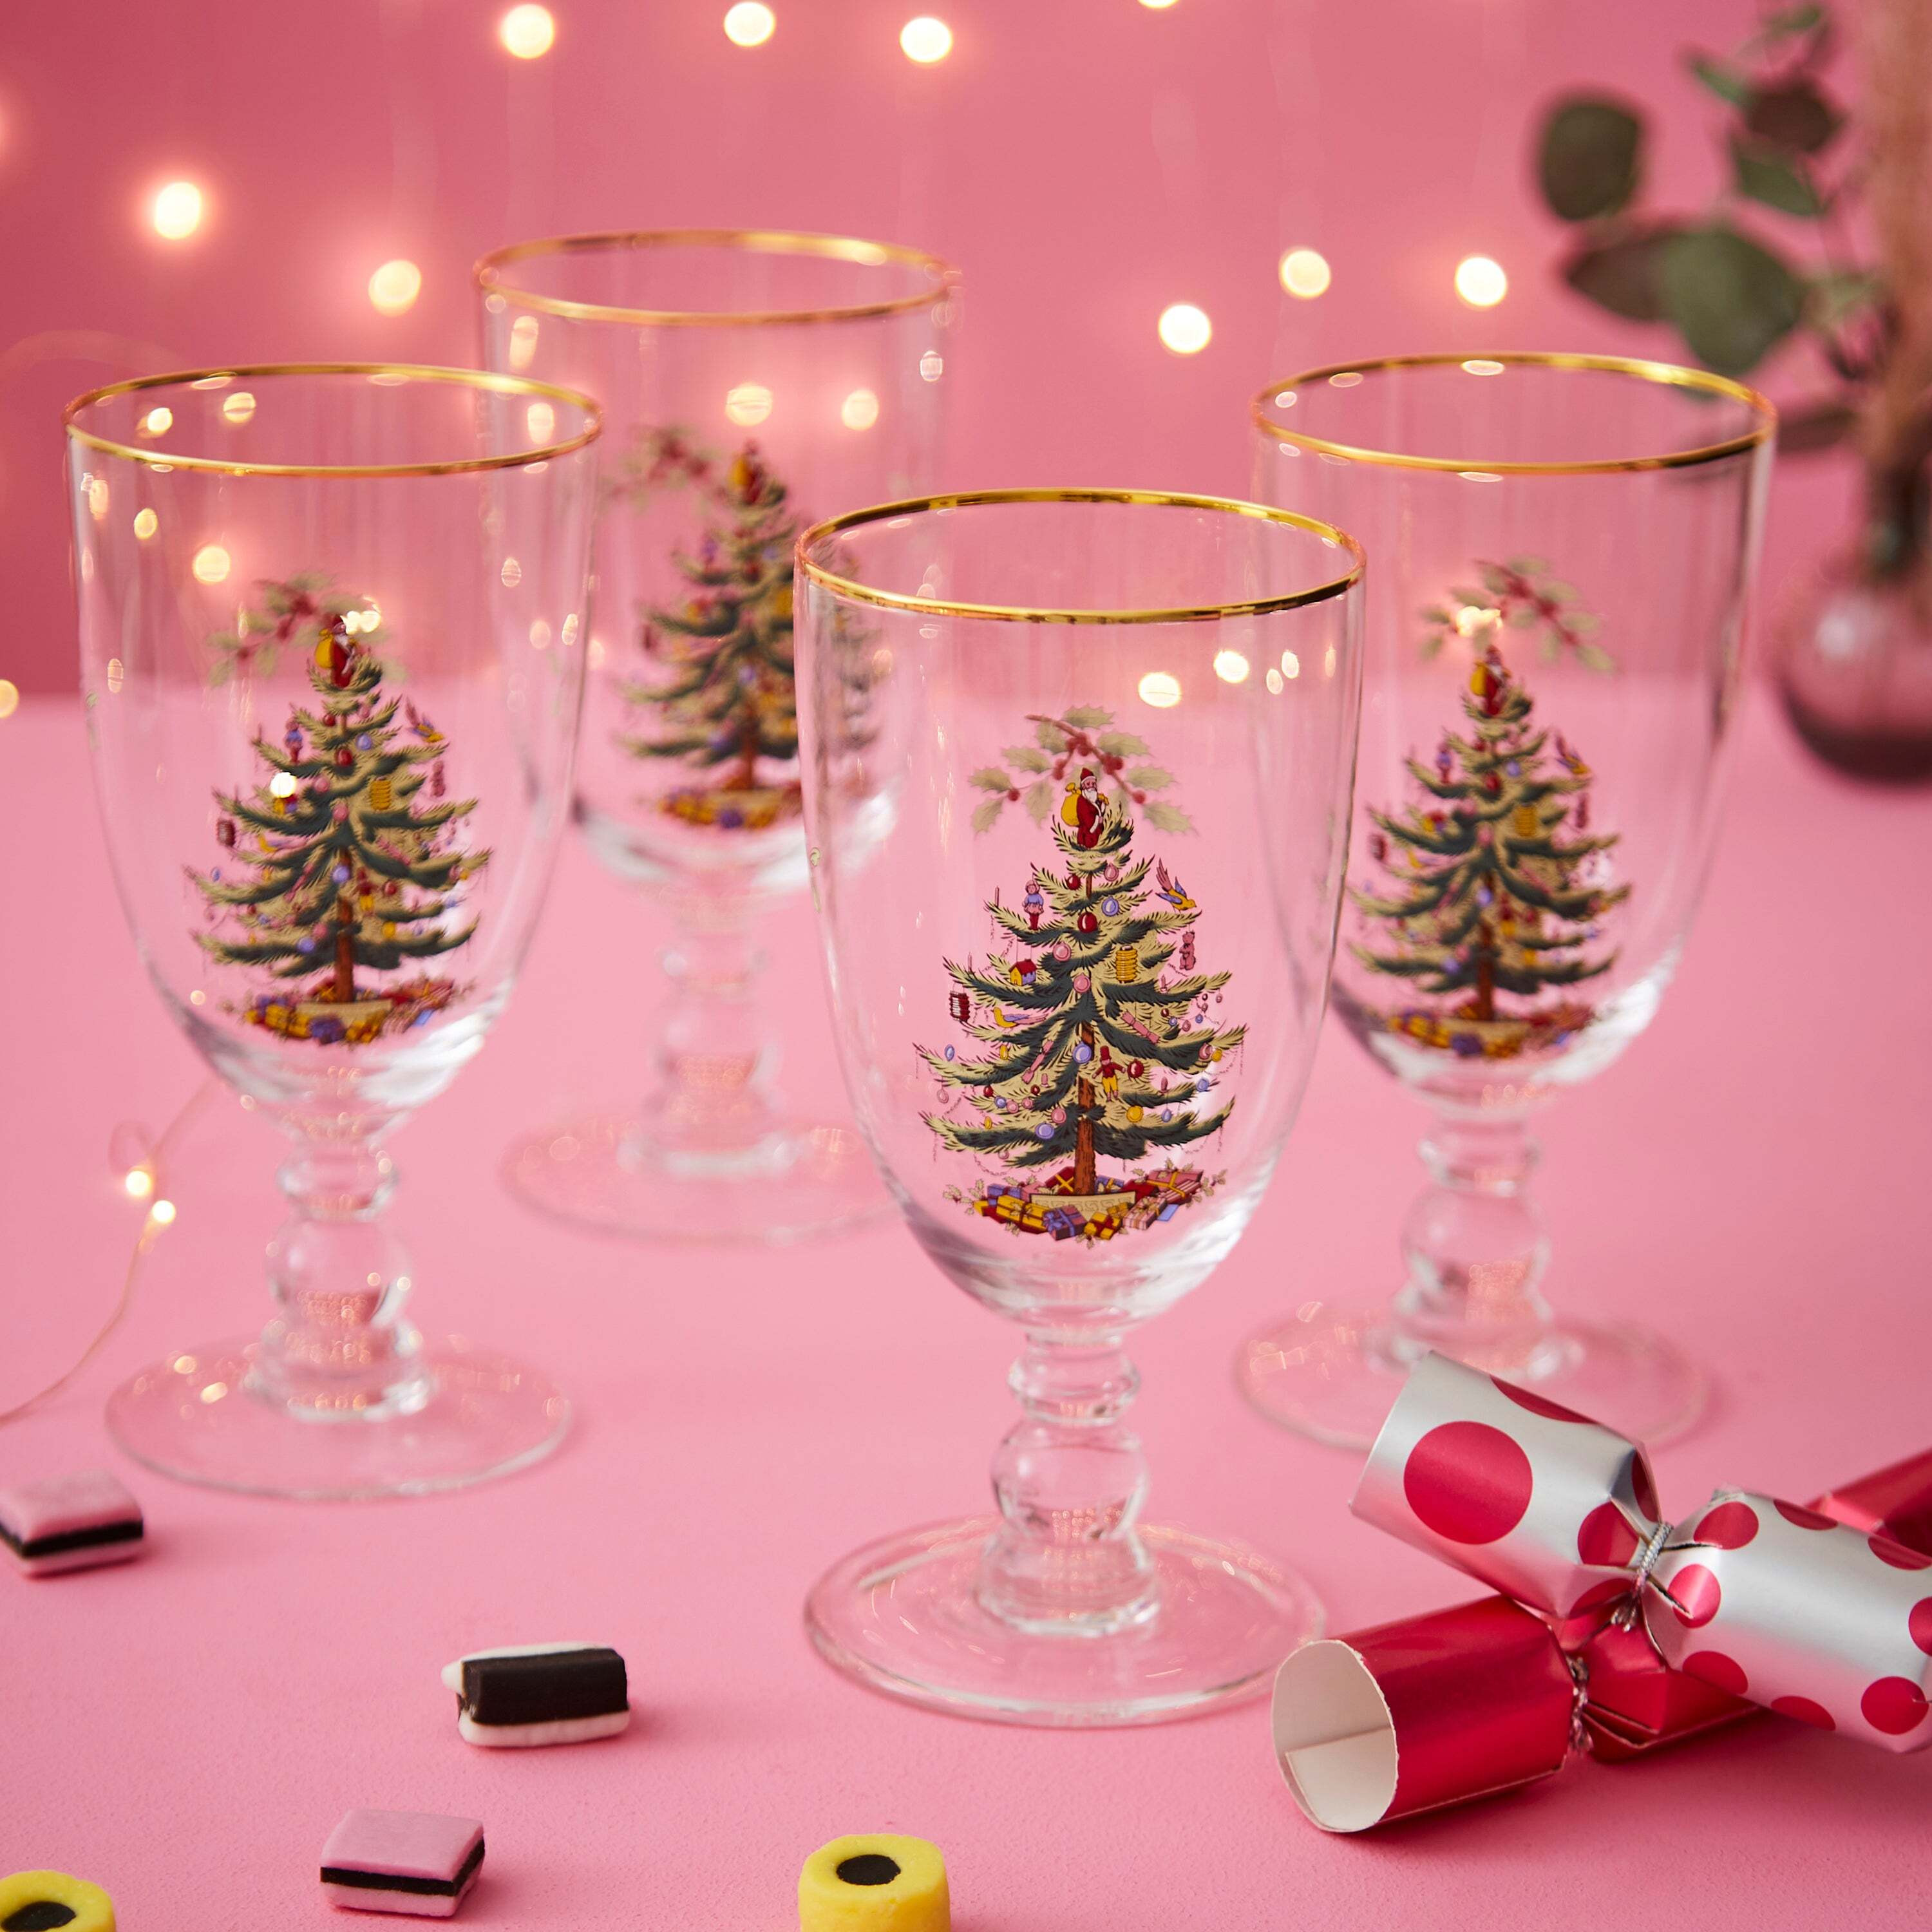 https://static.ufurnish.com/assets%2Fproduct-images%2Fdunelm%2F30874840%2Fchristmas-tree-set-of-4-goblets-clear-2b67c64e.jpg